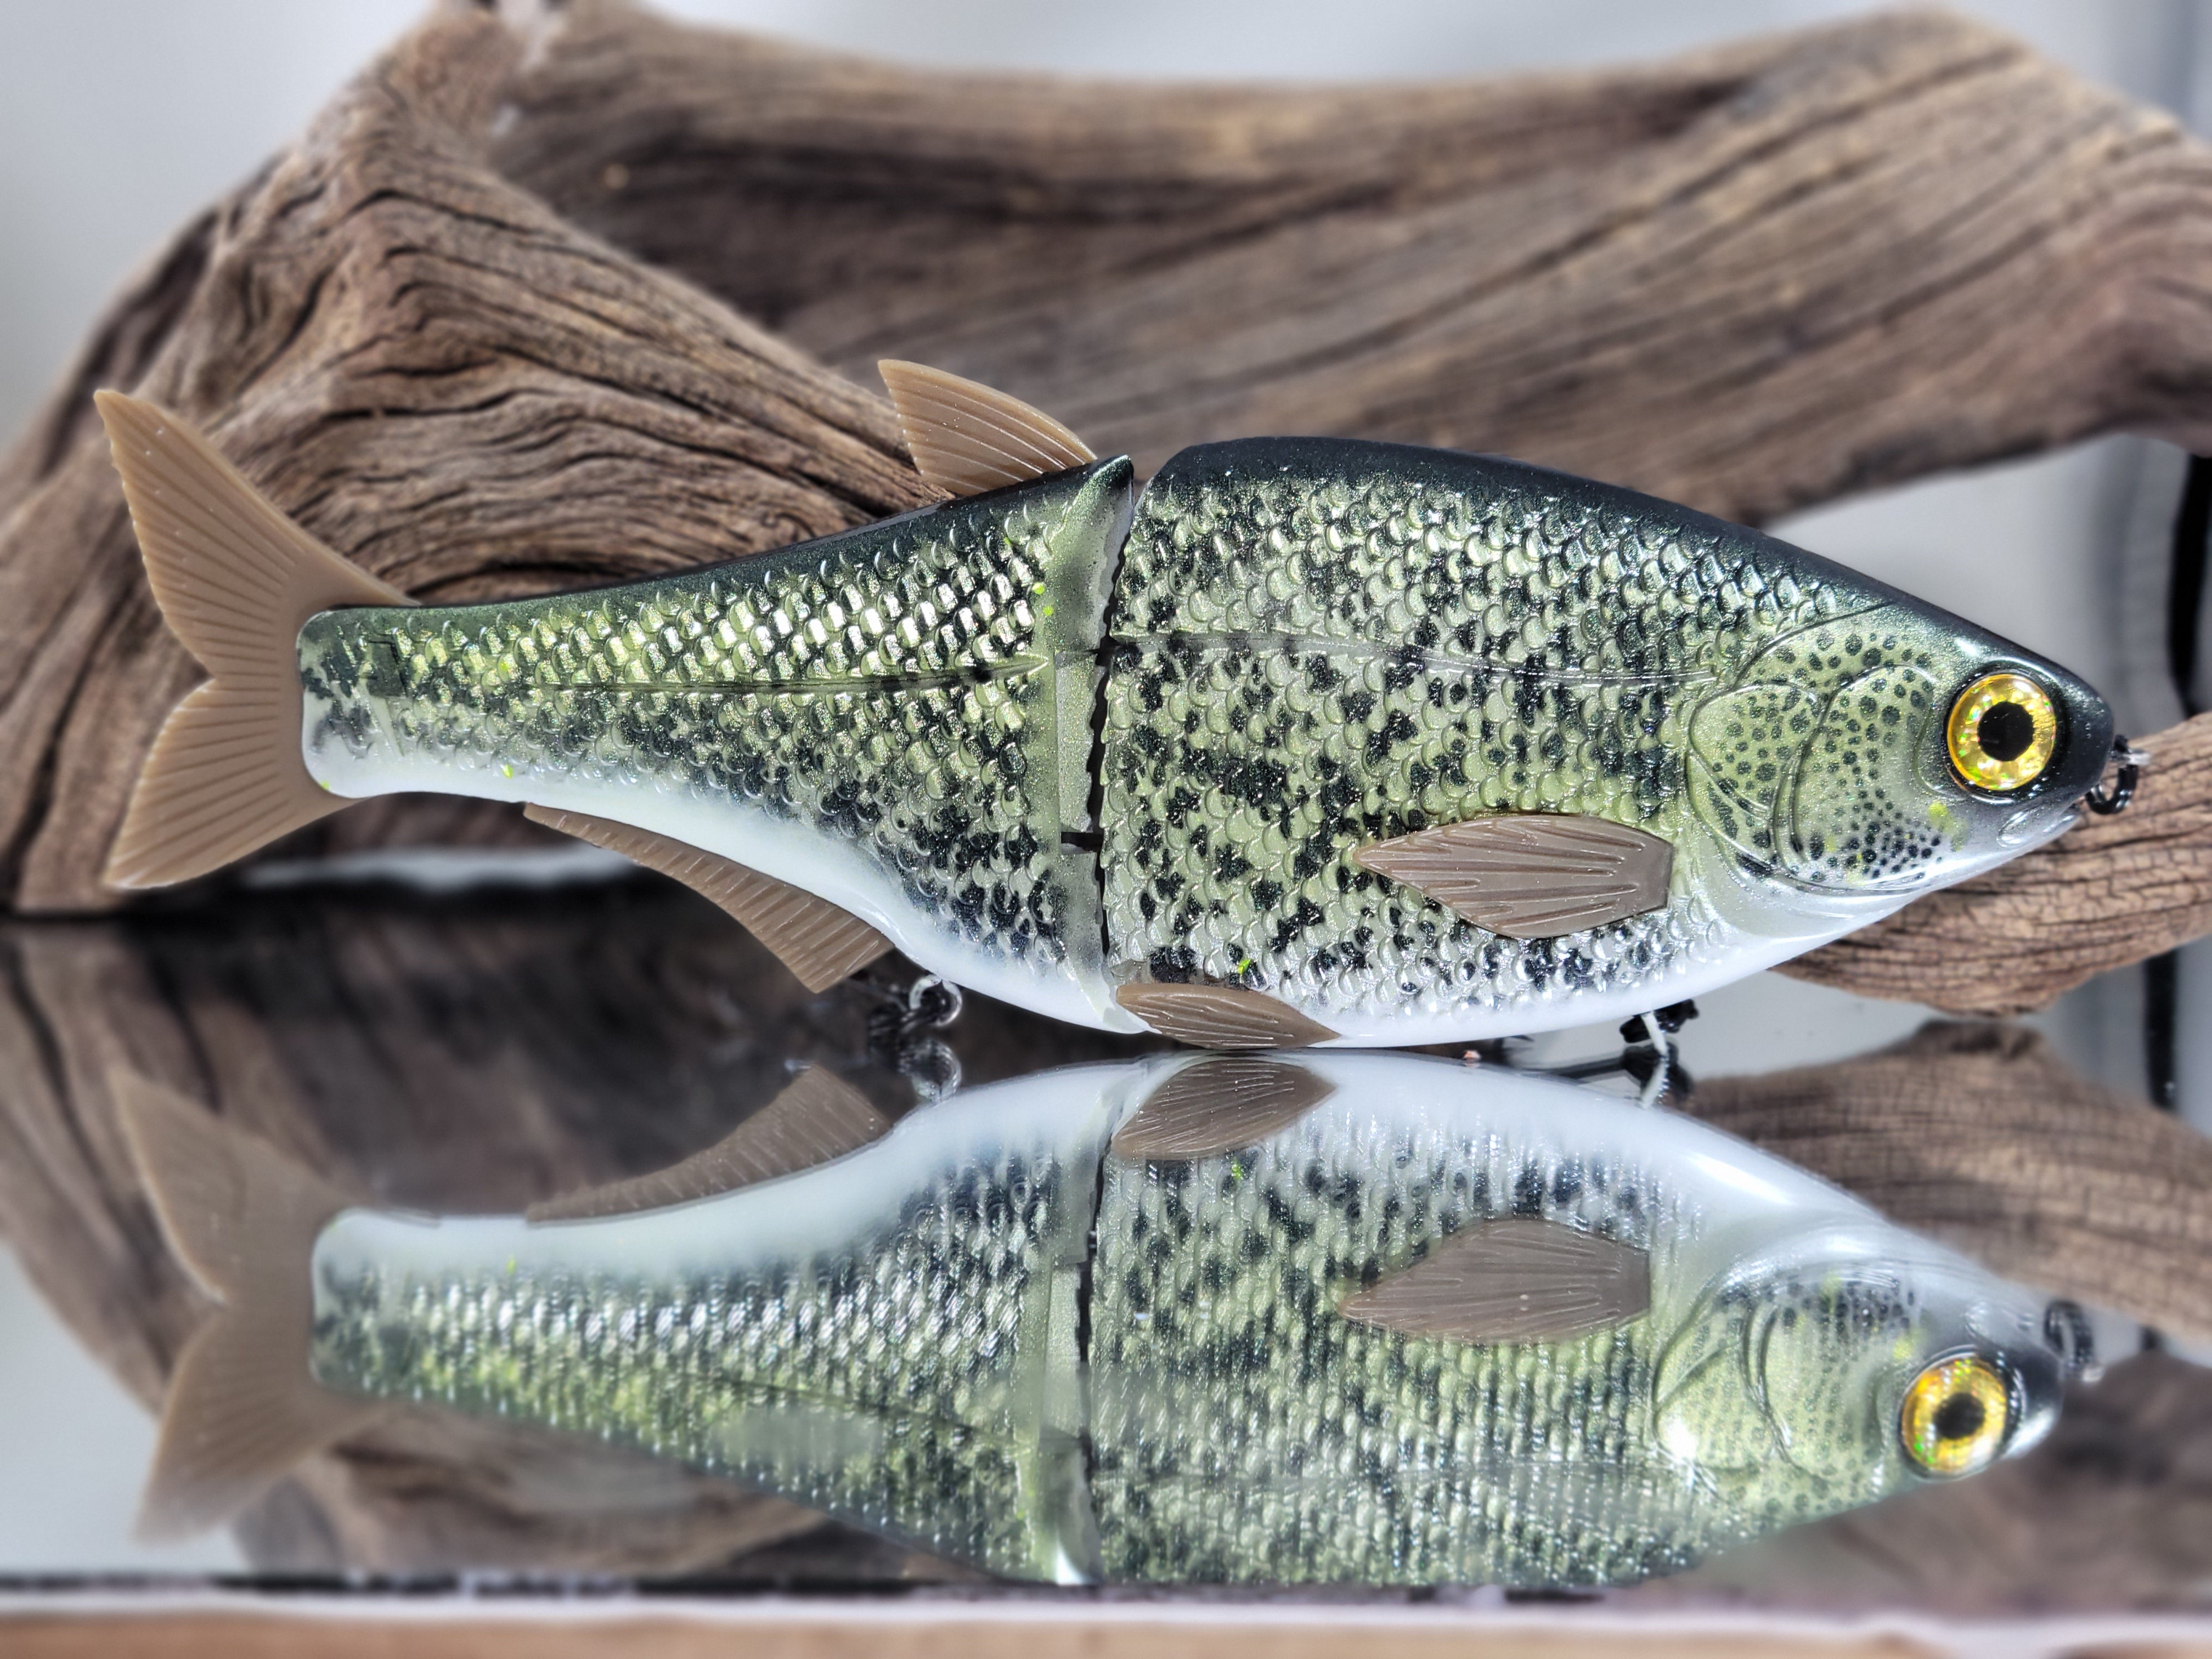 Hinkle Shad Style - Black Crappie - Clyde's Cranks